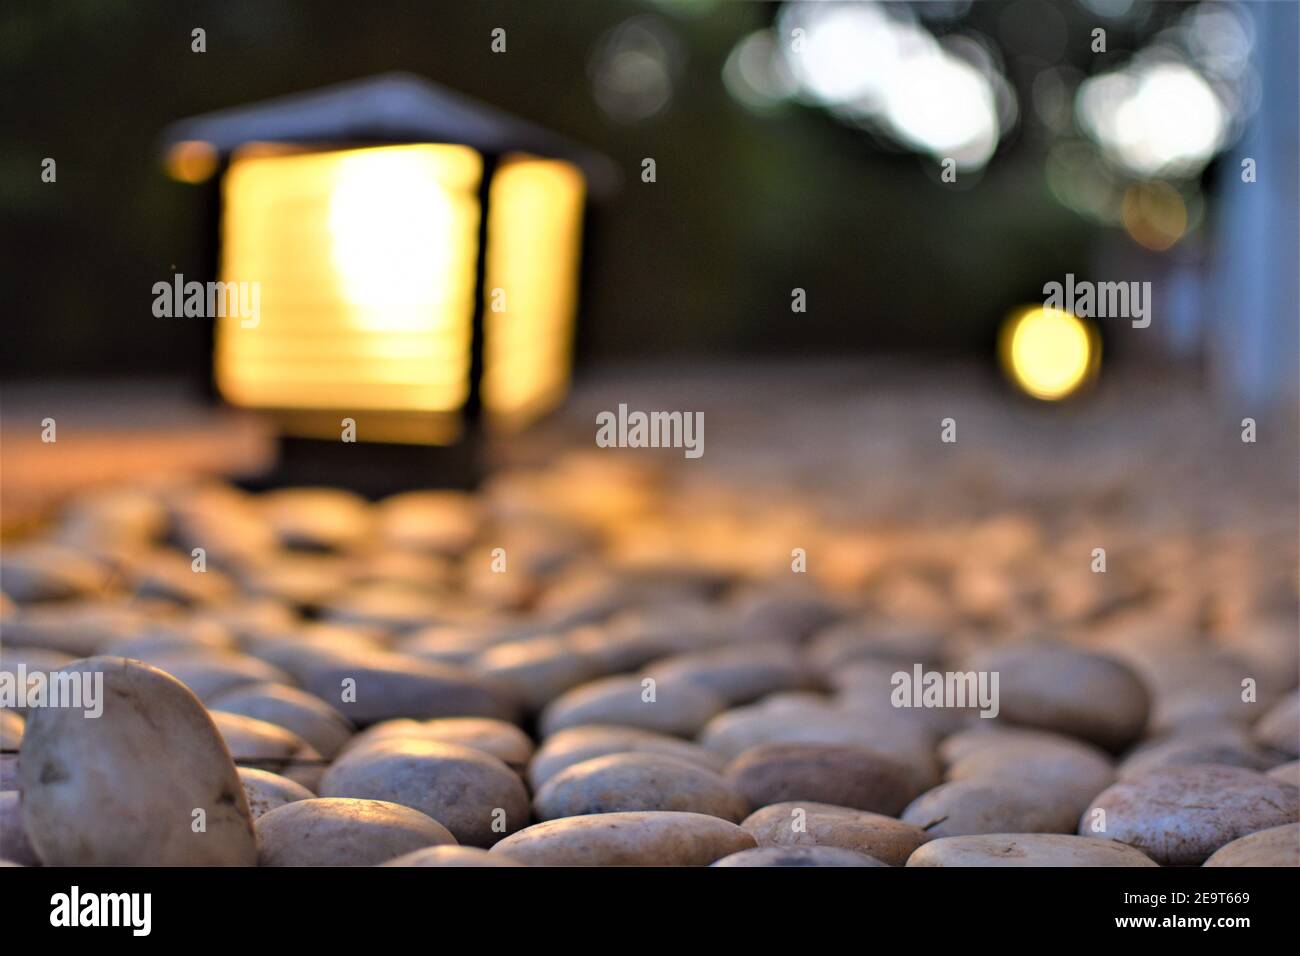 White pebbles with a lit garden lamp in the background Stock Photo